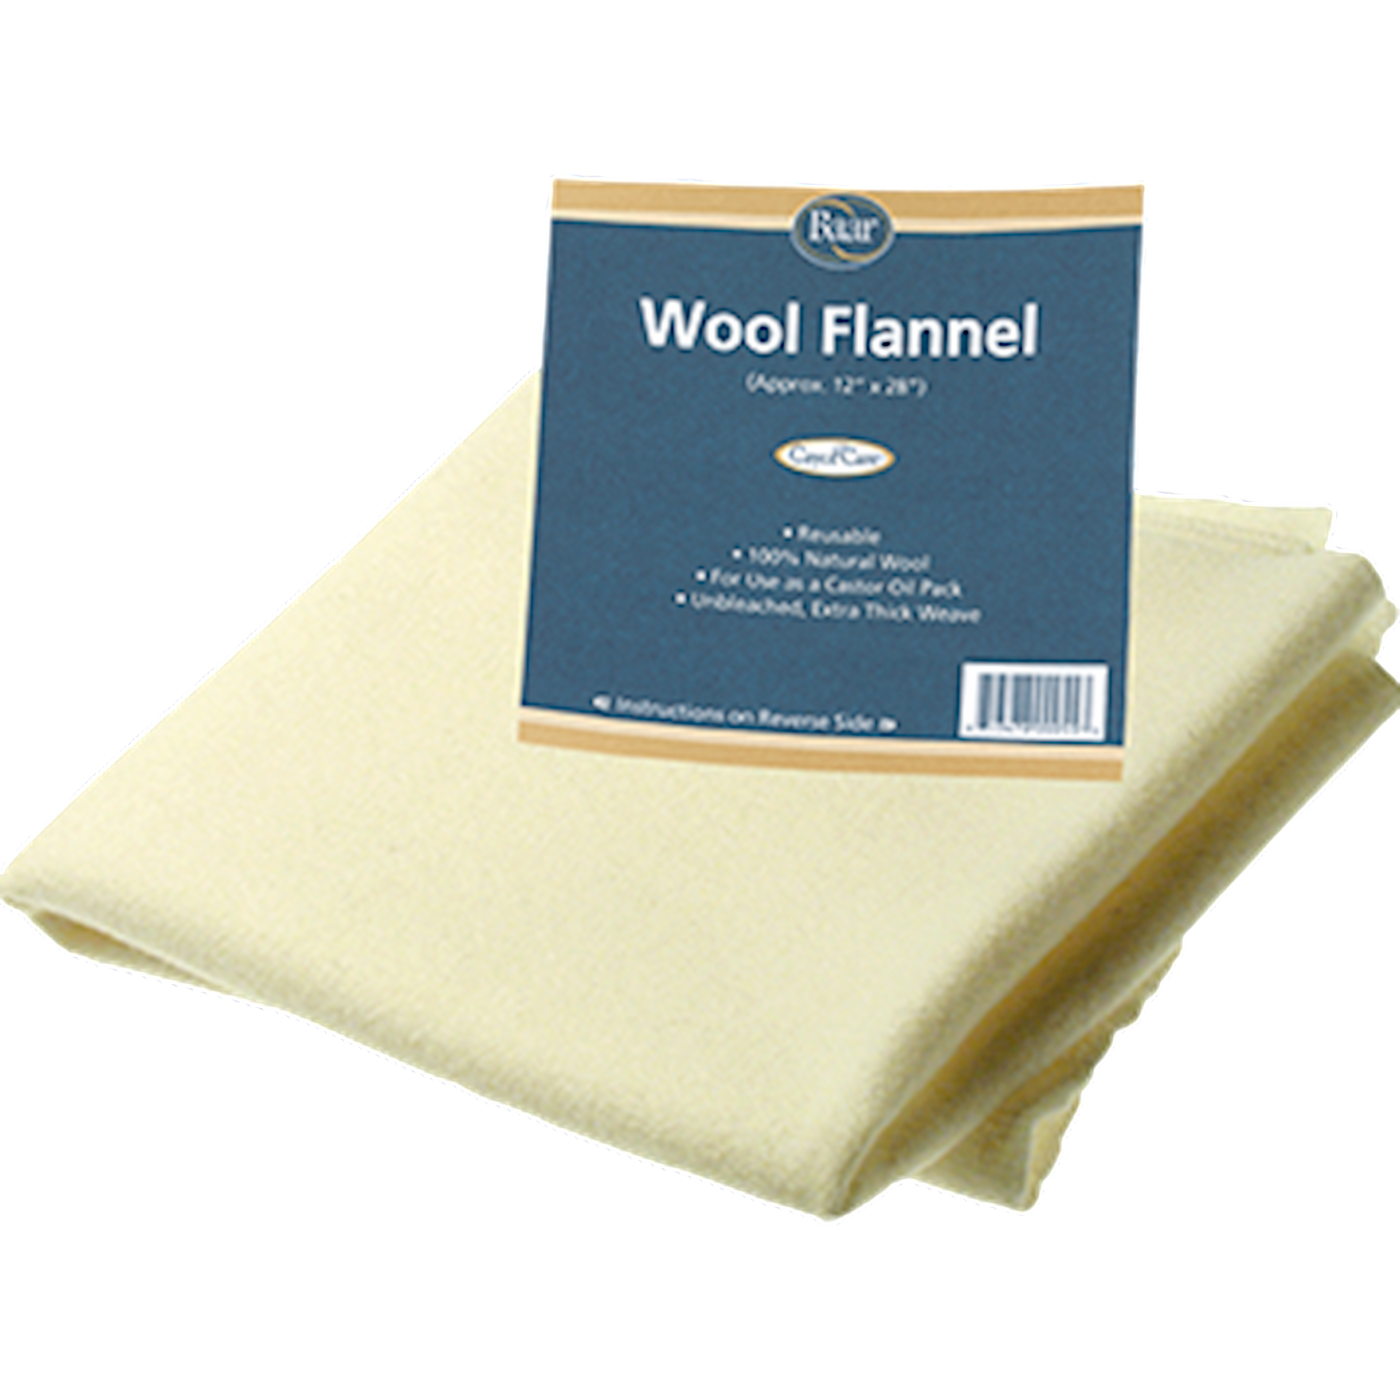 Wool Flannel for Castor Oil packs 1 pkt Curated Wellness